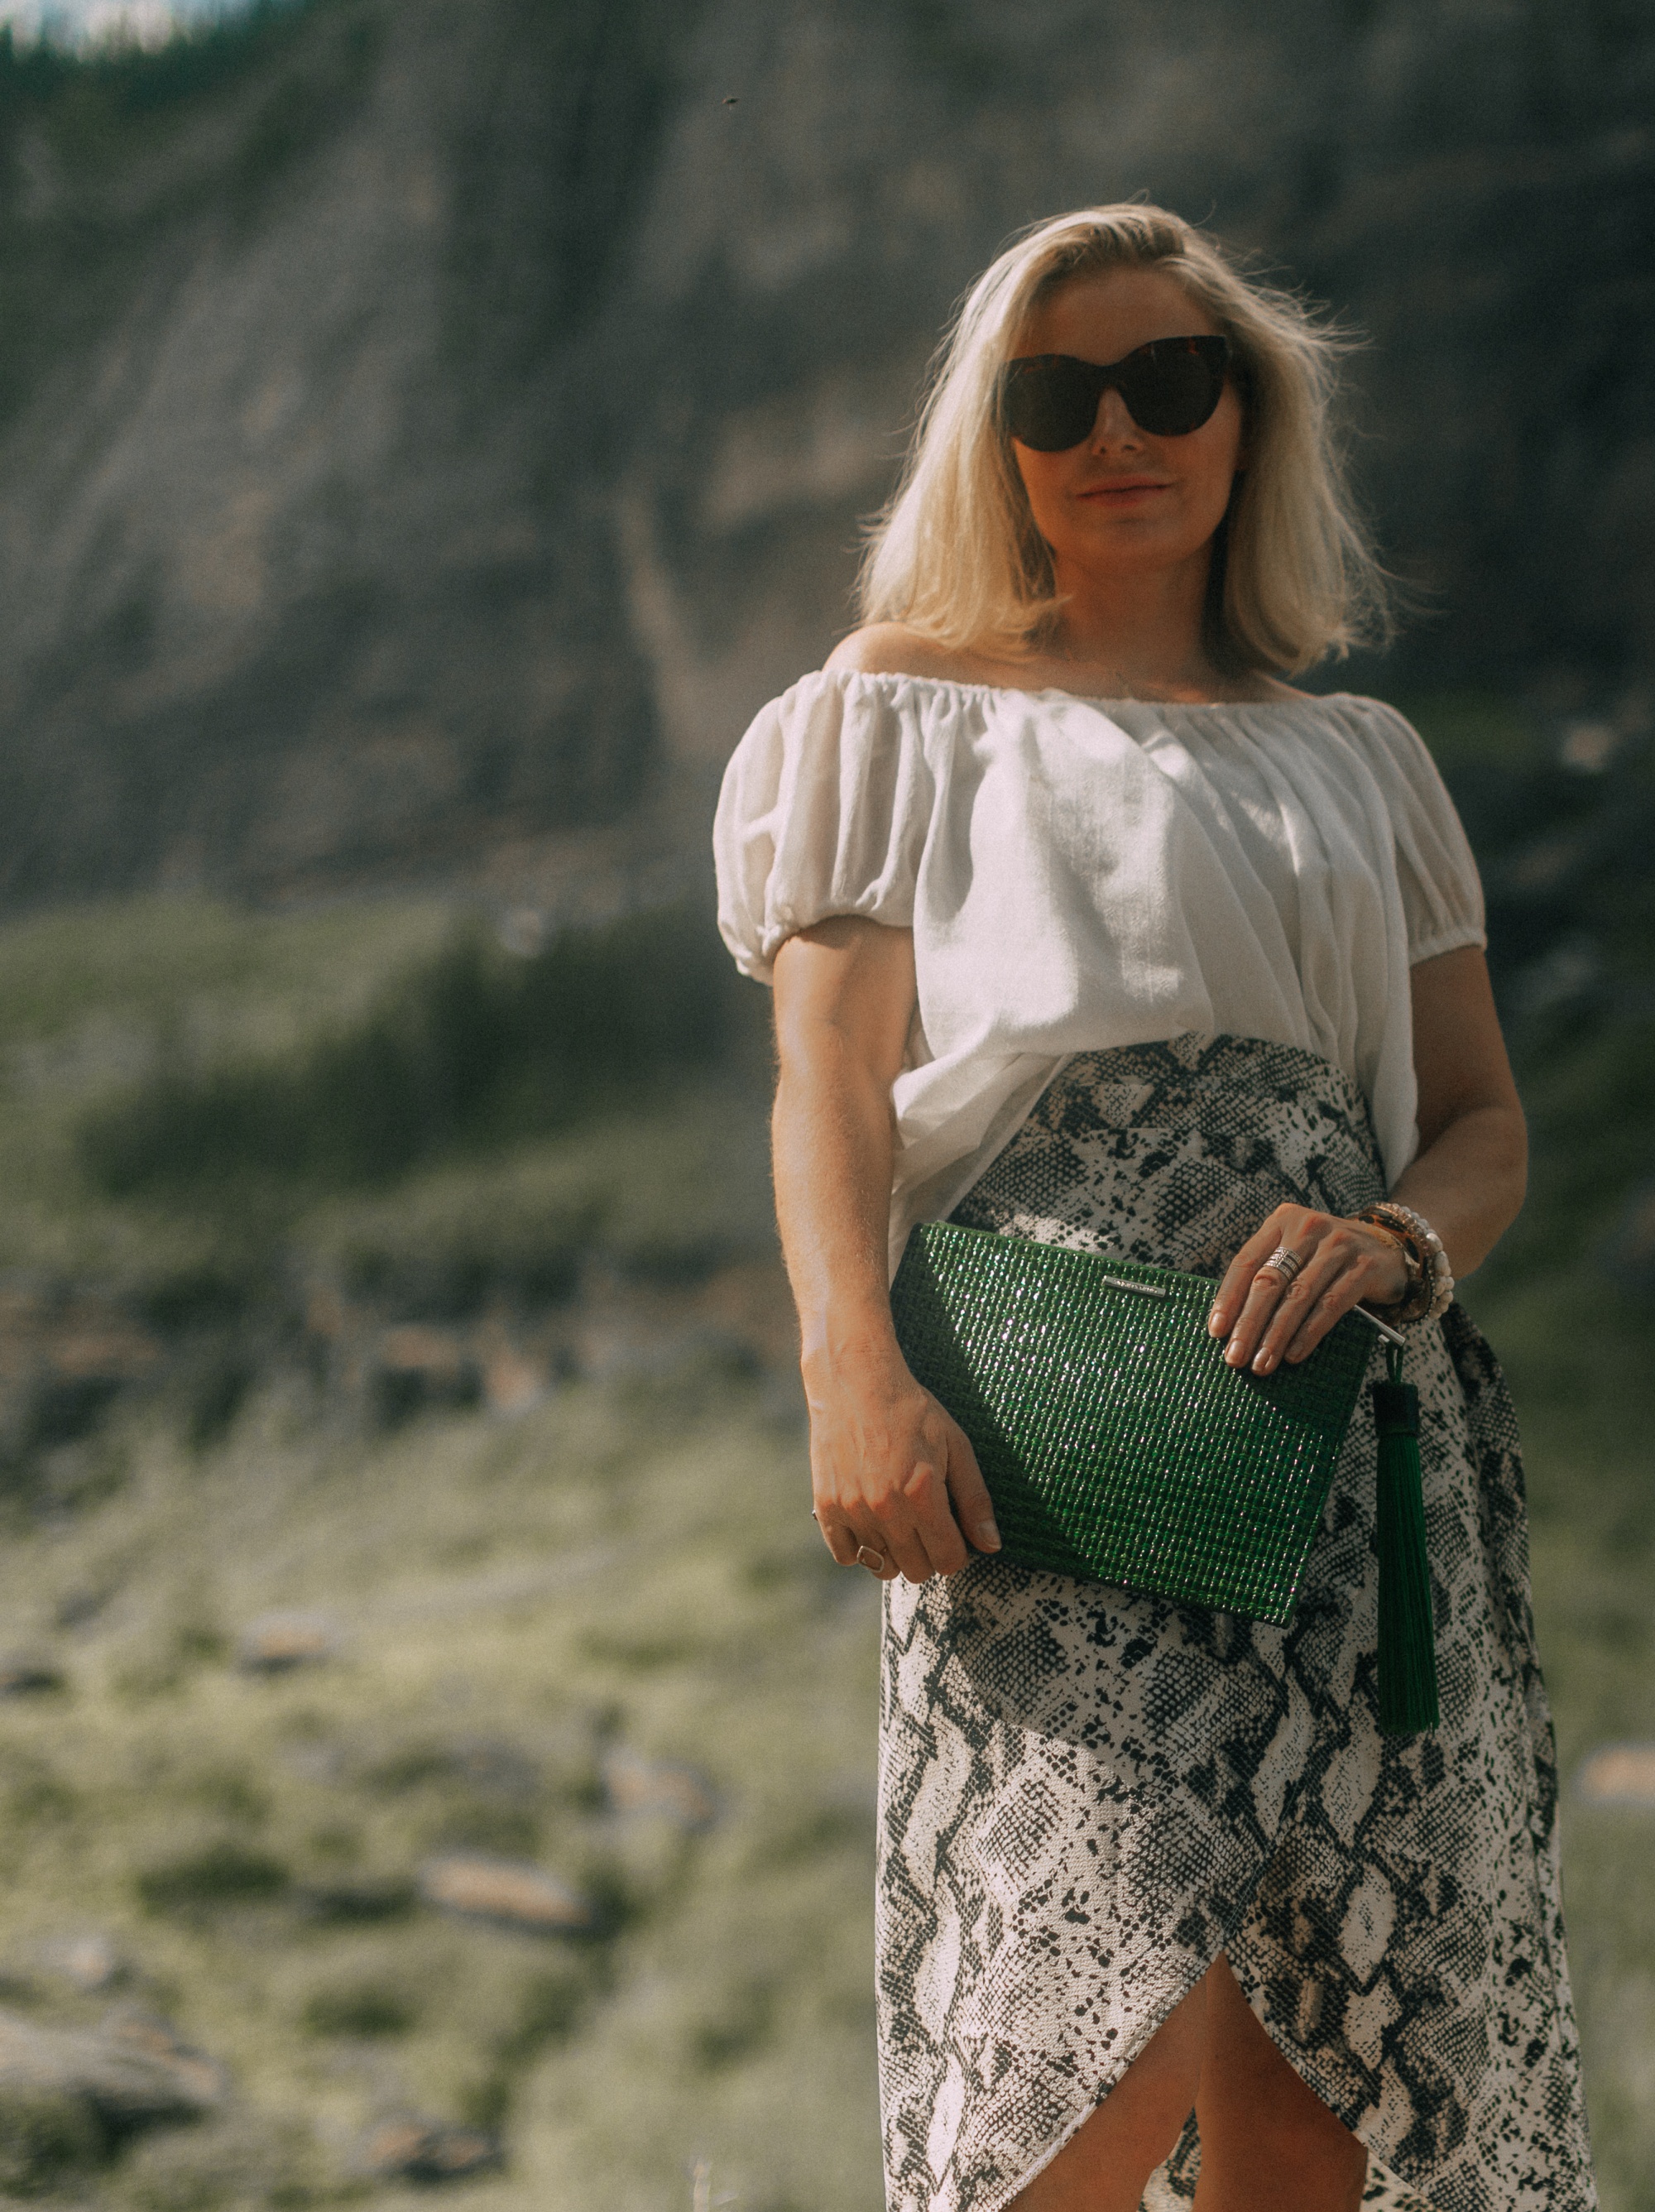 Styling animal print clothes with neutral Accessories, Fashion blogger Erin Busbee of BusbeeStyle,com wearing metallic gold croc-embossed sandals and green clutch from Vince Camuto with a white off the shoulder top and python print wrap skirt from Evereve in Telluride, CO